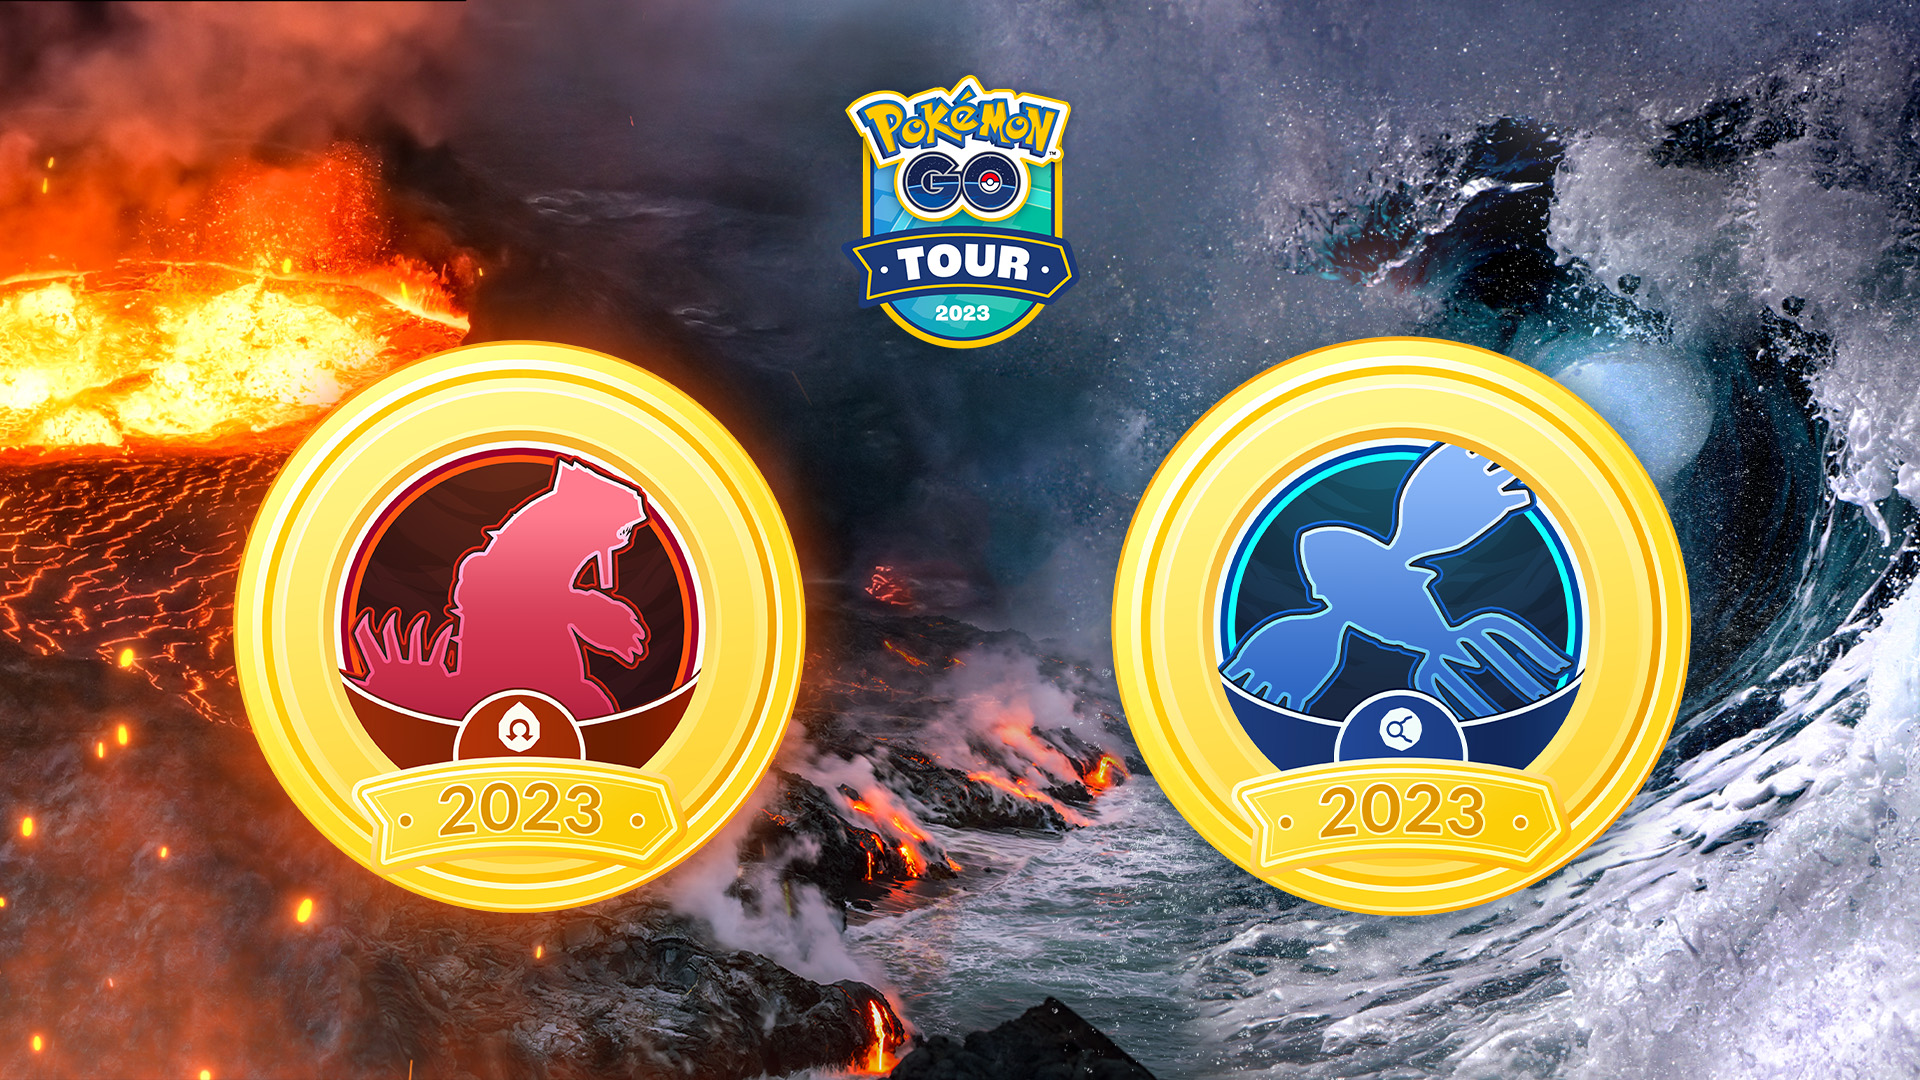 Pokémon Go Hoenn Collection Challenge: How to complete the